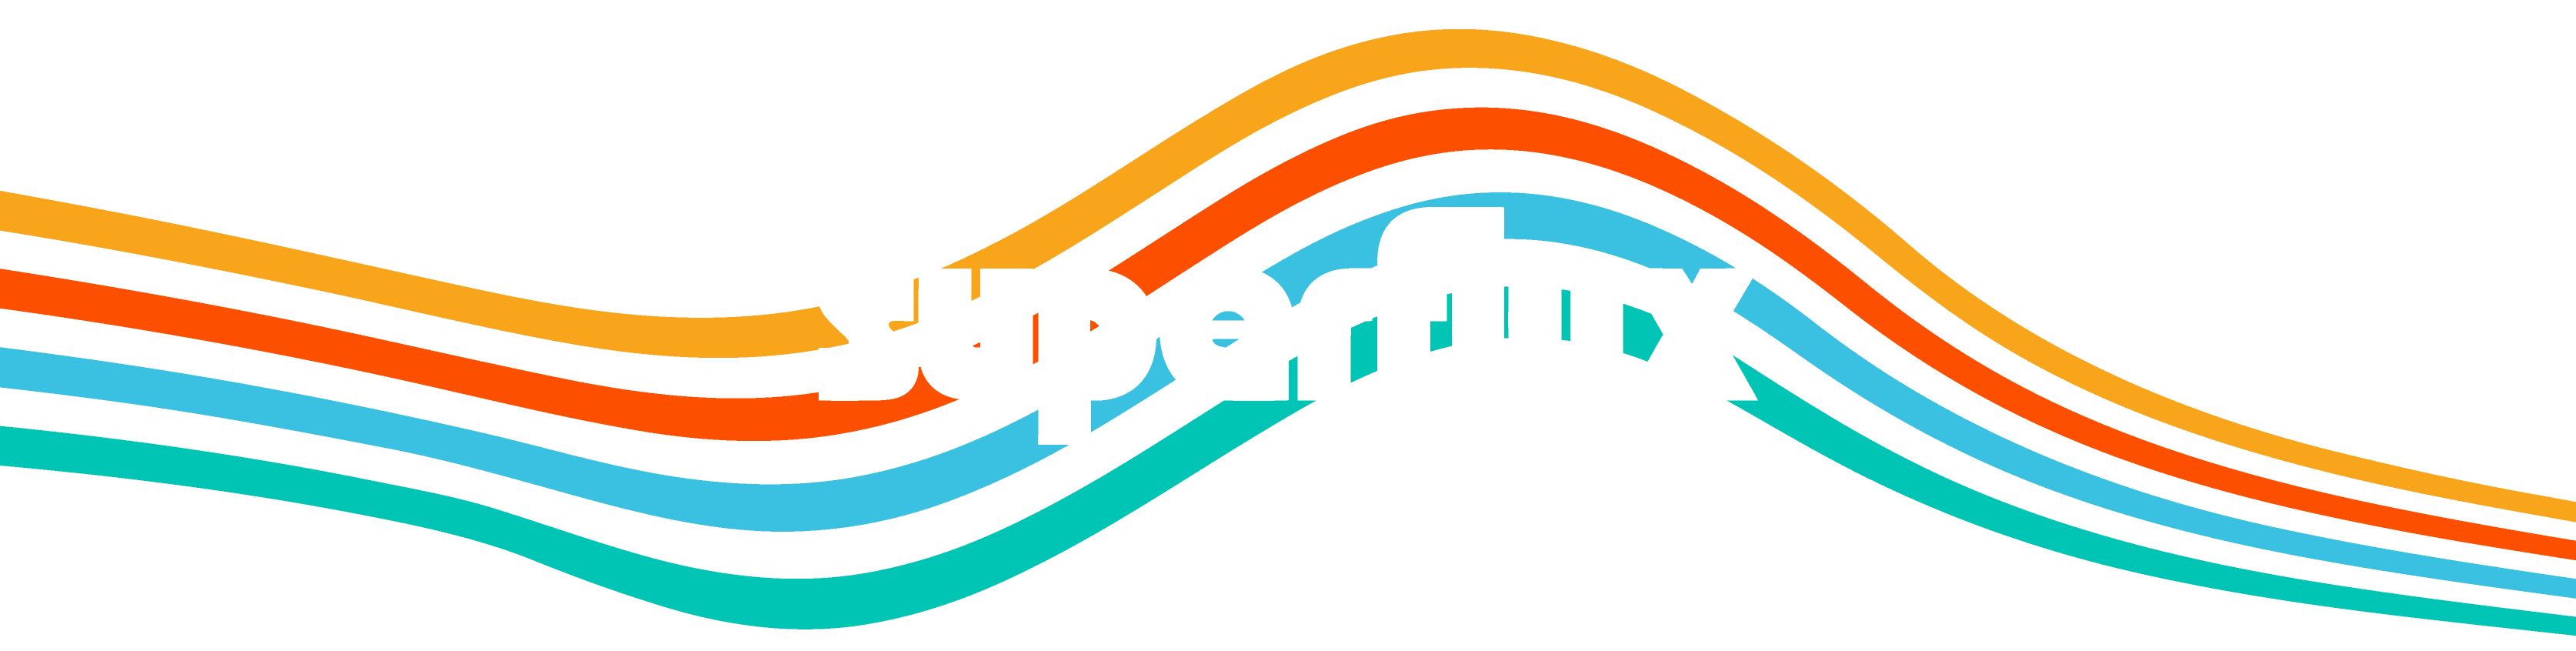 Superflux logo banner with colourful lines